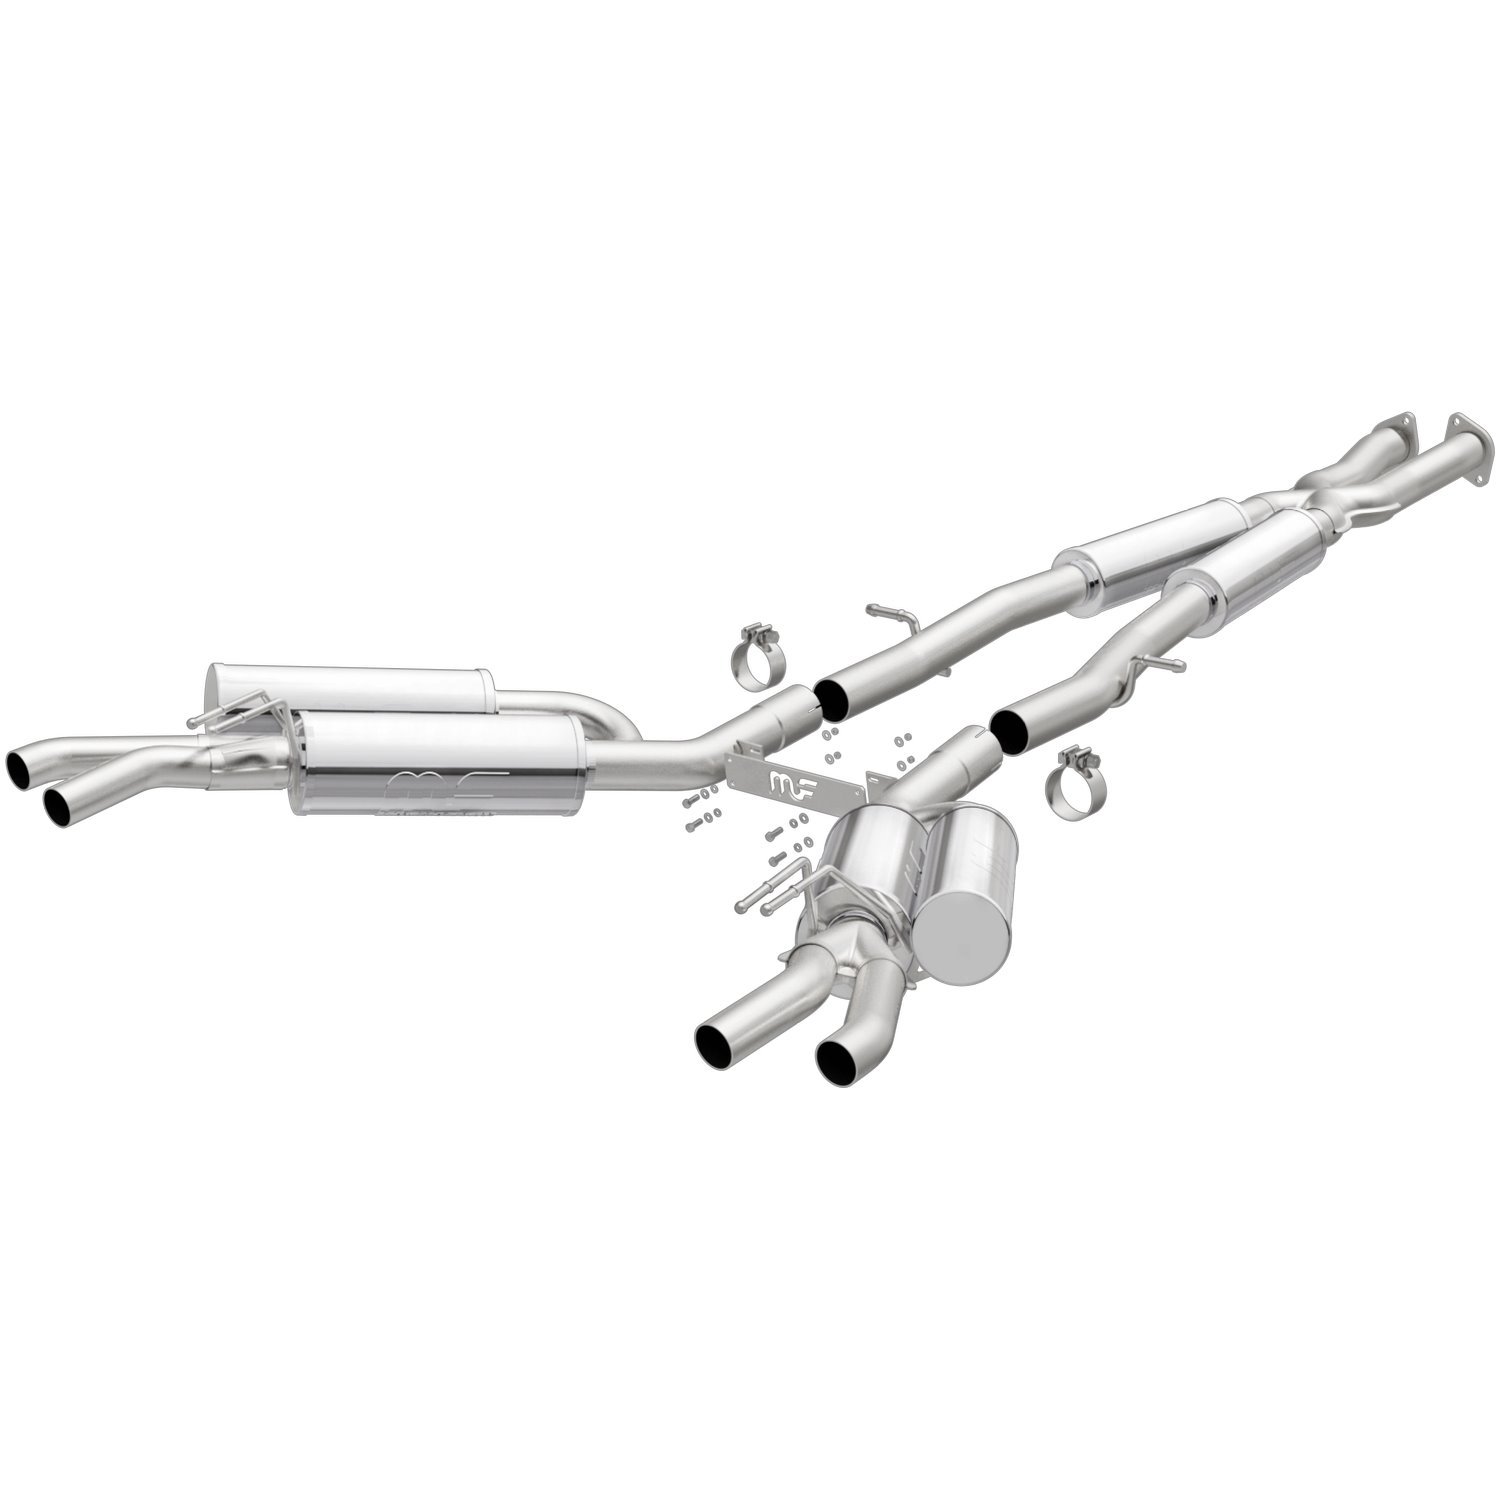 Competition Series Cat-Back Exhaust System 2018-19 Fits KIA Stinger 3.3L V6